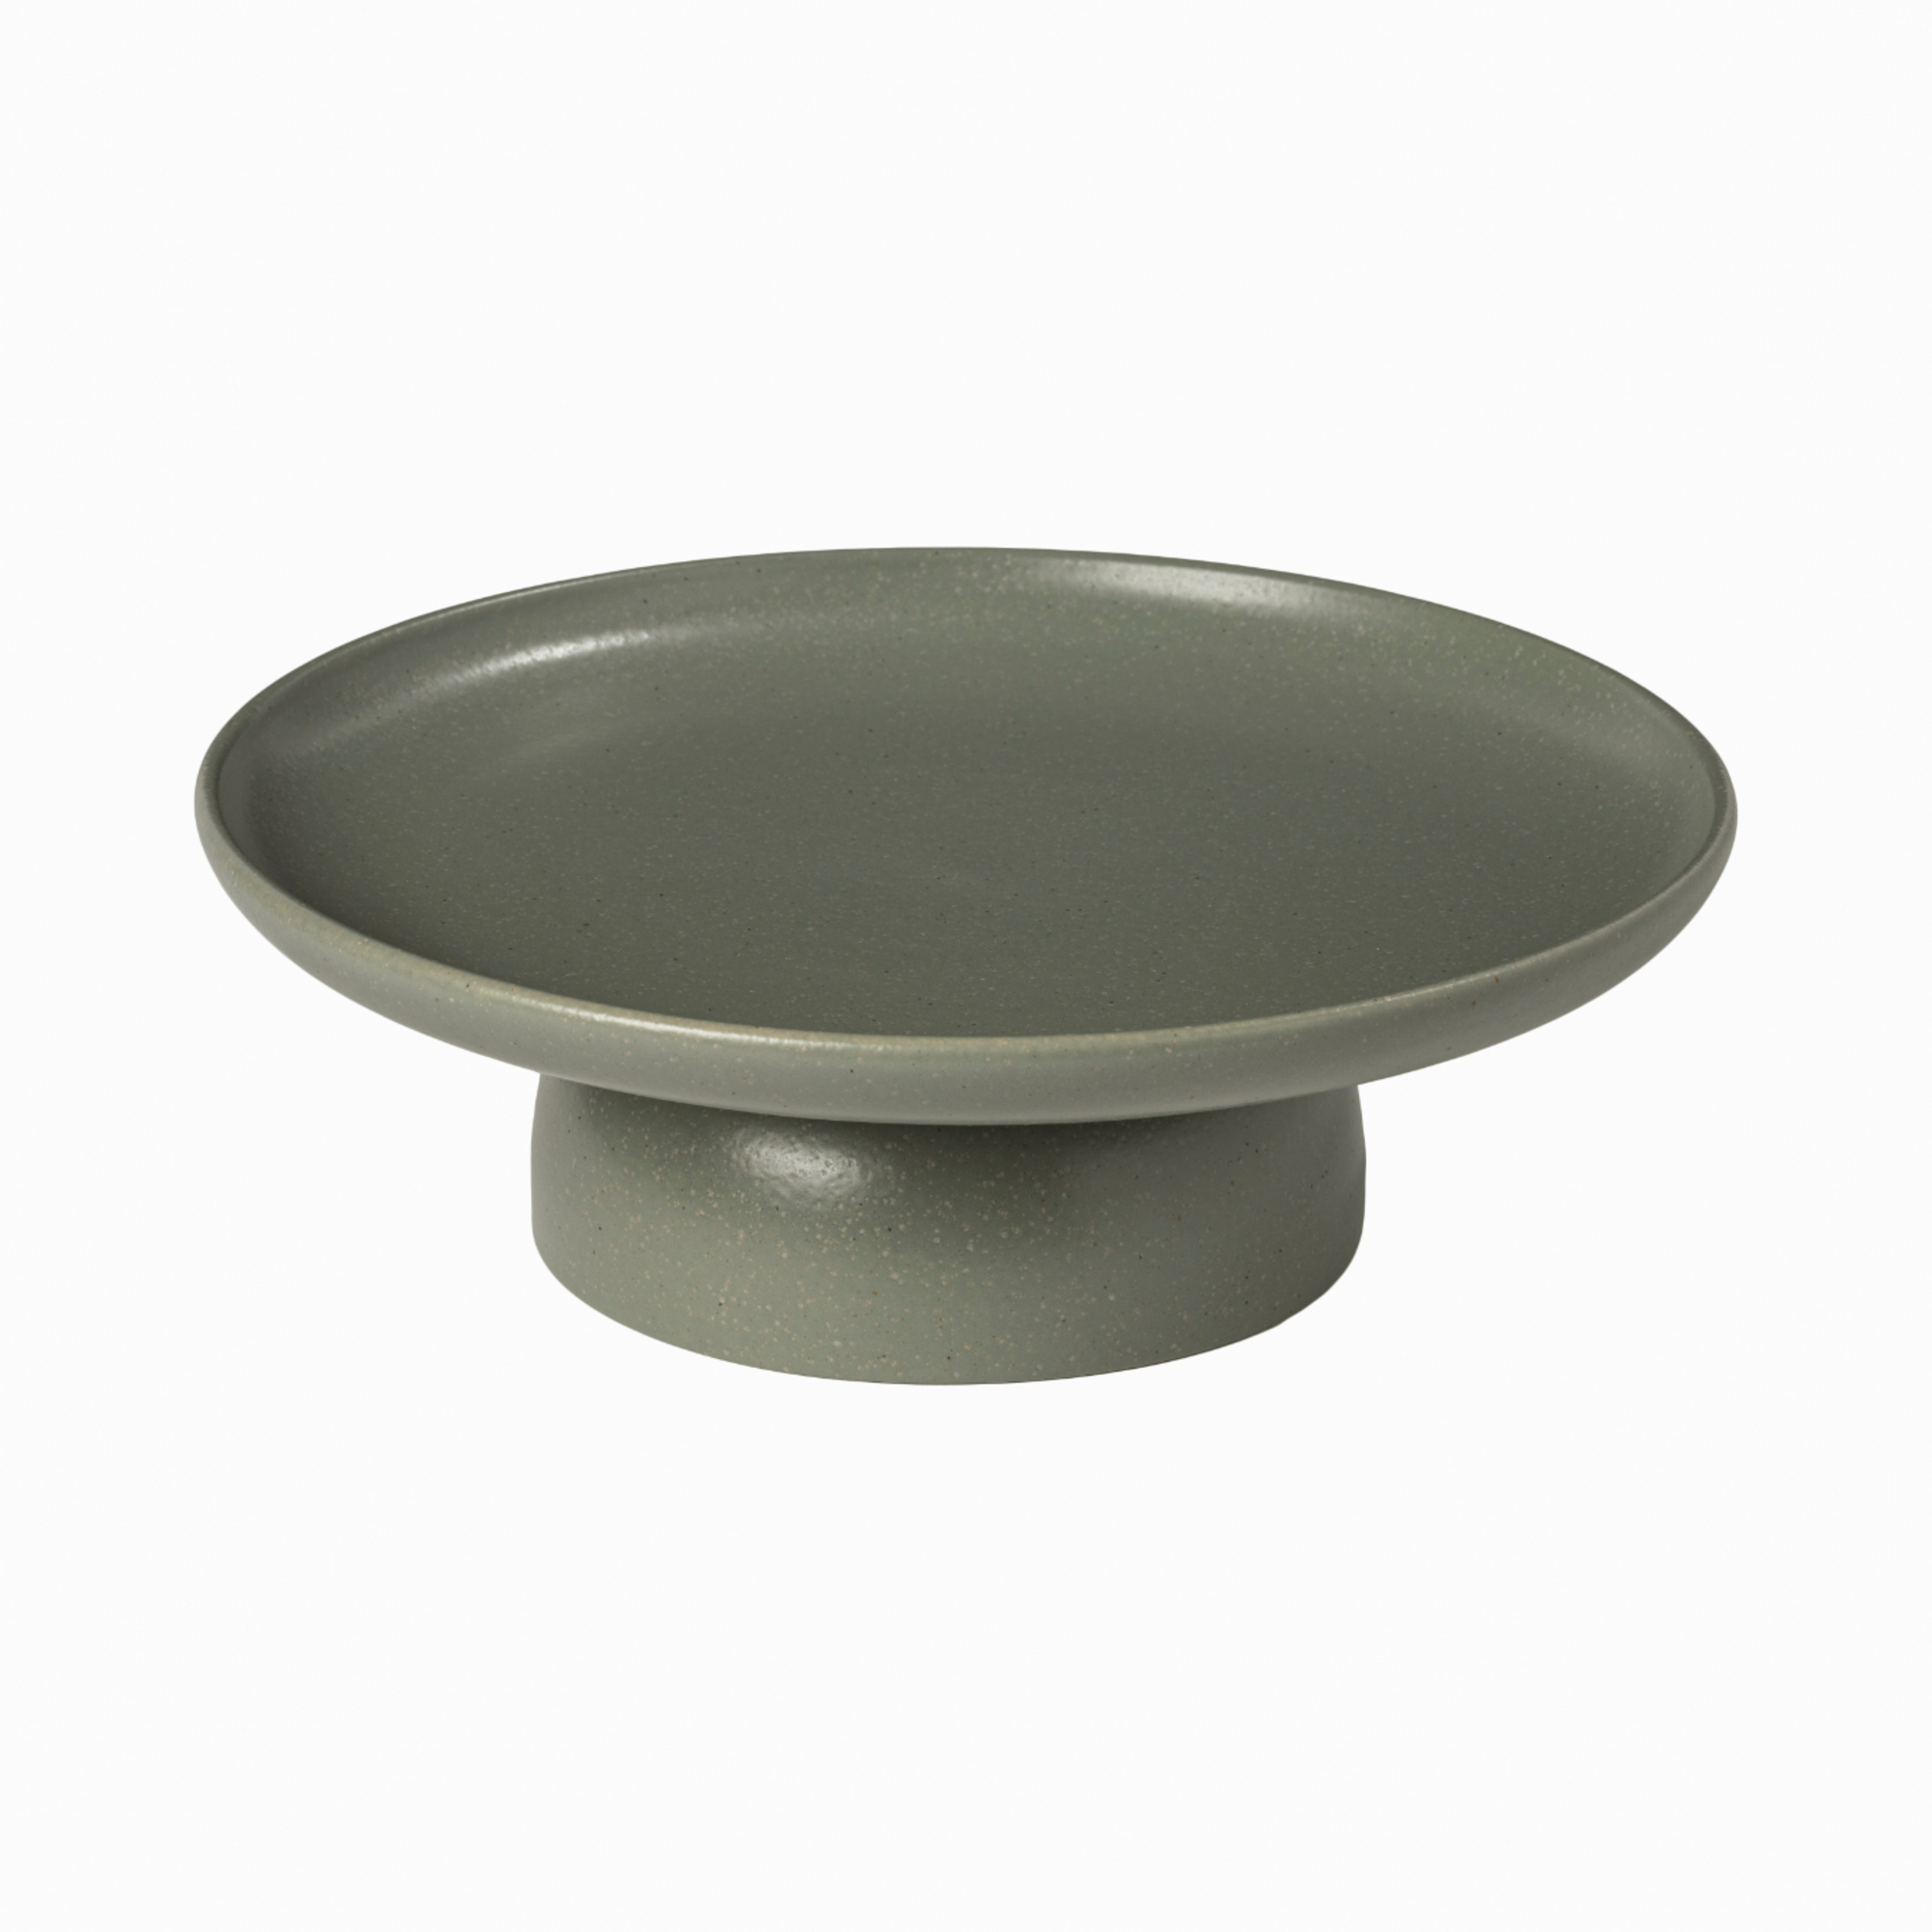 Pacifica Artichoke Footed Plate 26.8cm Gift